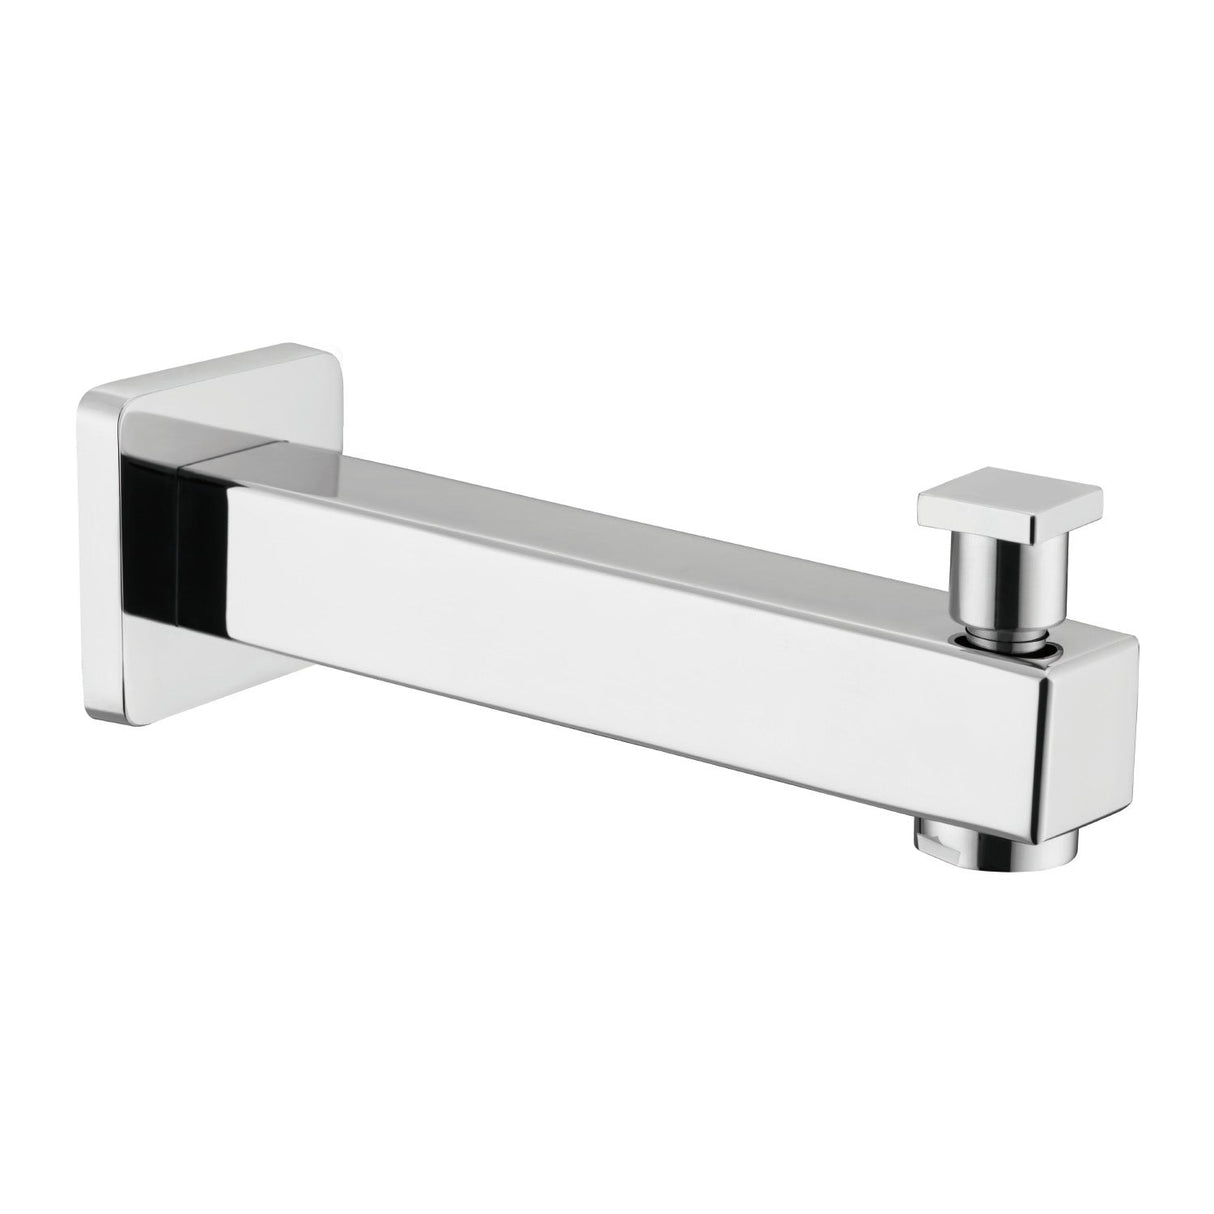 DAX Brass Square Spout with Diverter, Chrome DAX-1030-1-CR